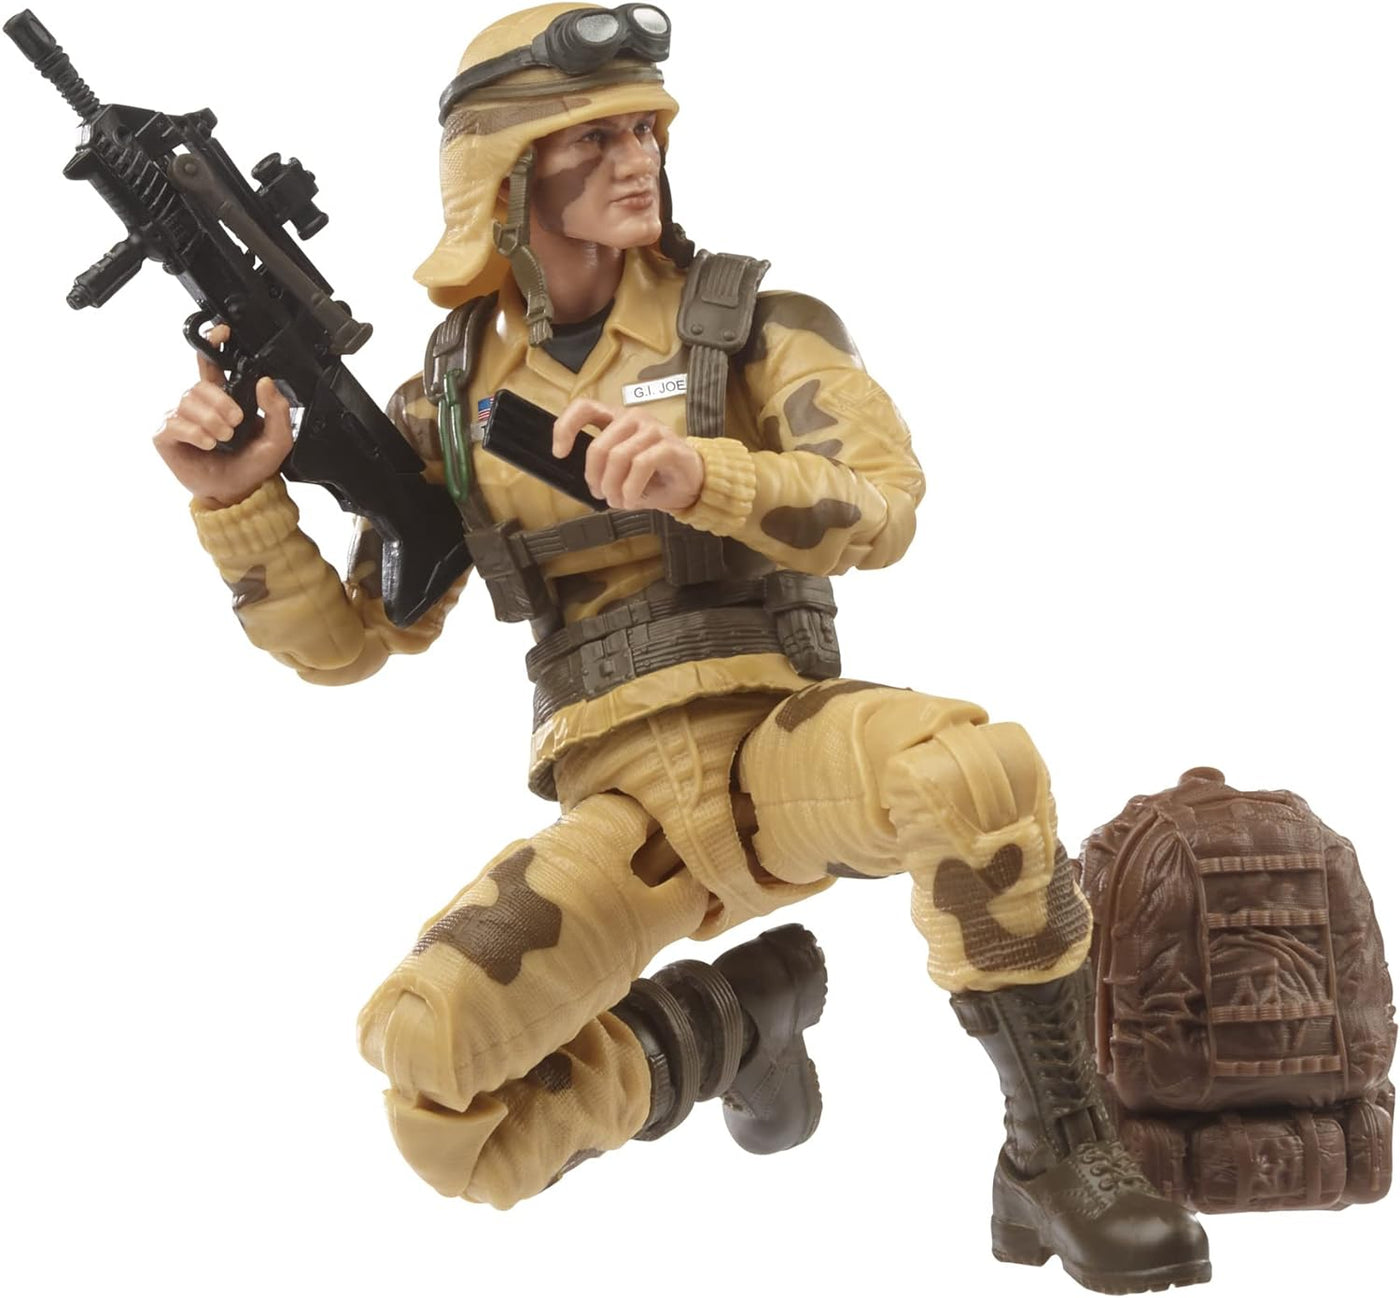 G.I. Joe Classified Series Dusty Action Figure 49 Collectible Premium Toys with Multiple Accessories 6-Inch-Scale with Custom Package Art